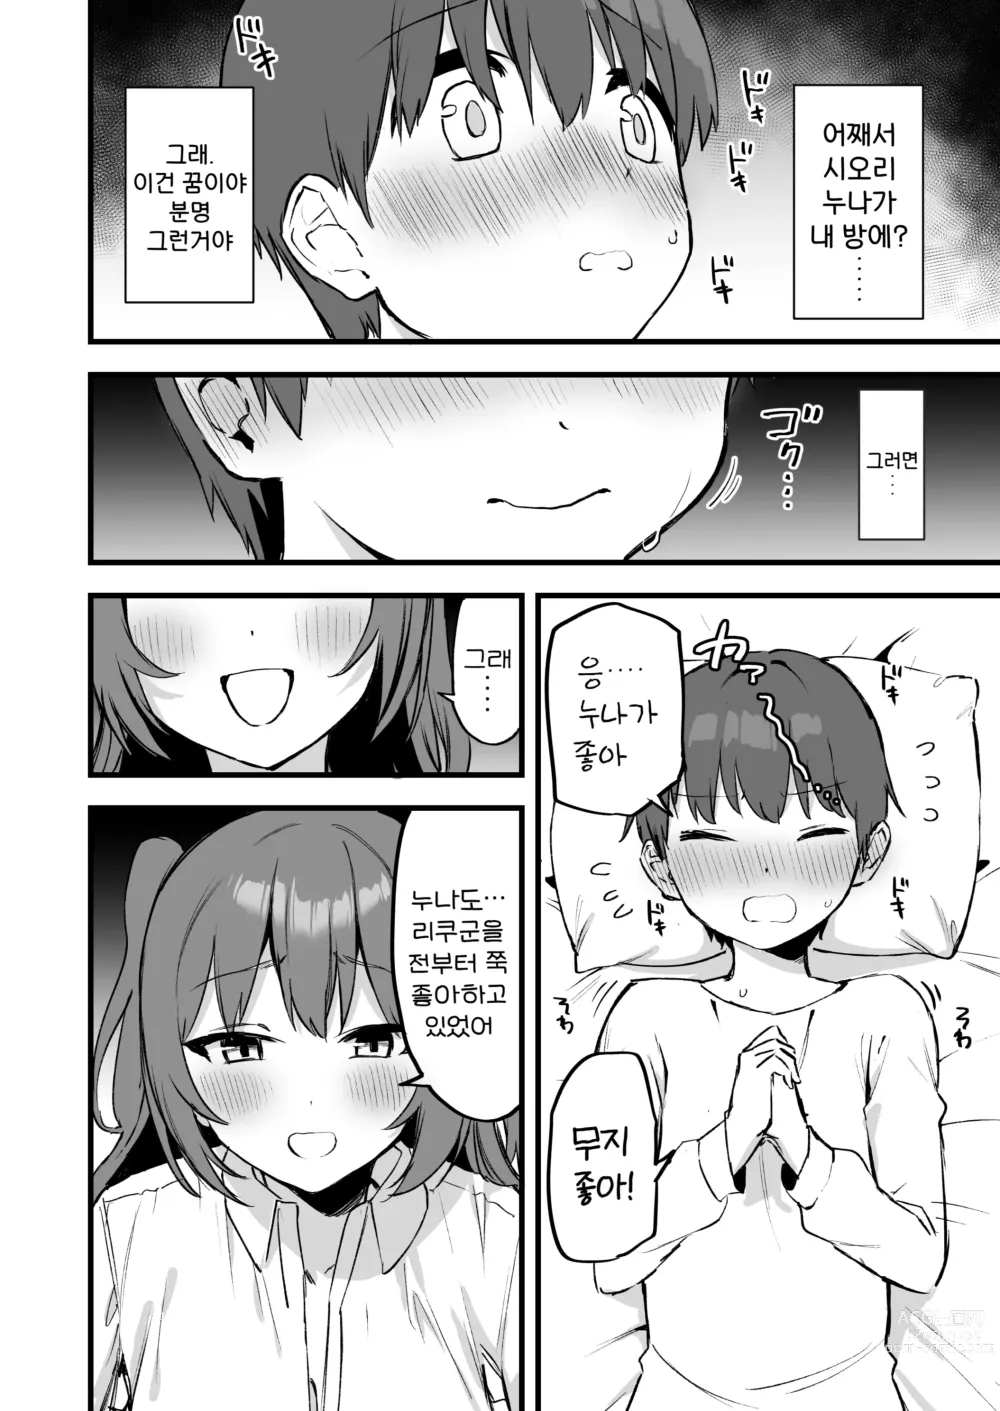 Page 6 of doujinshi 누나는 서큐버스!?